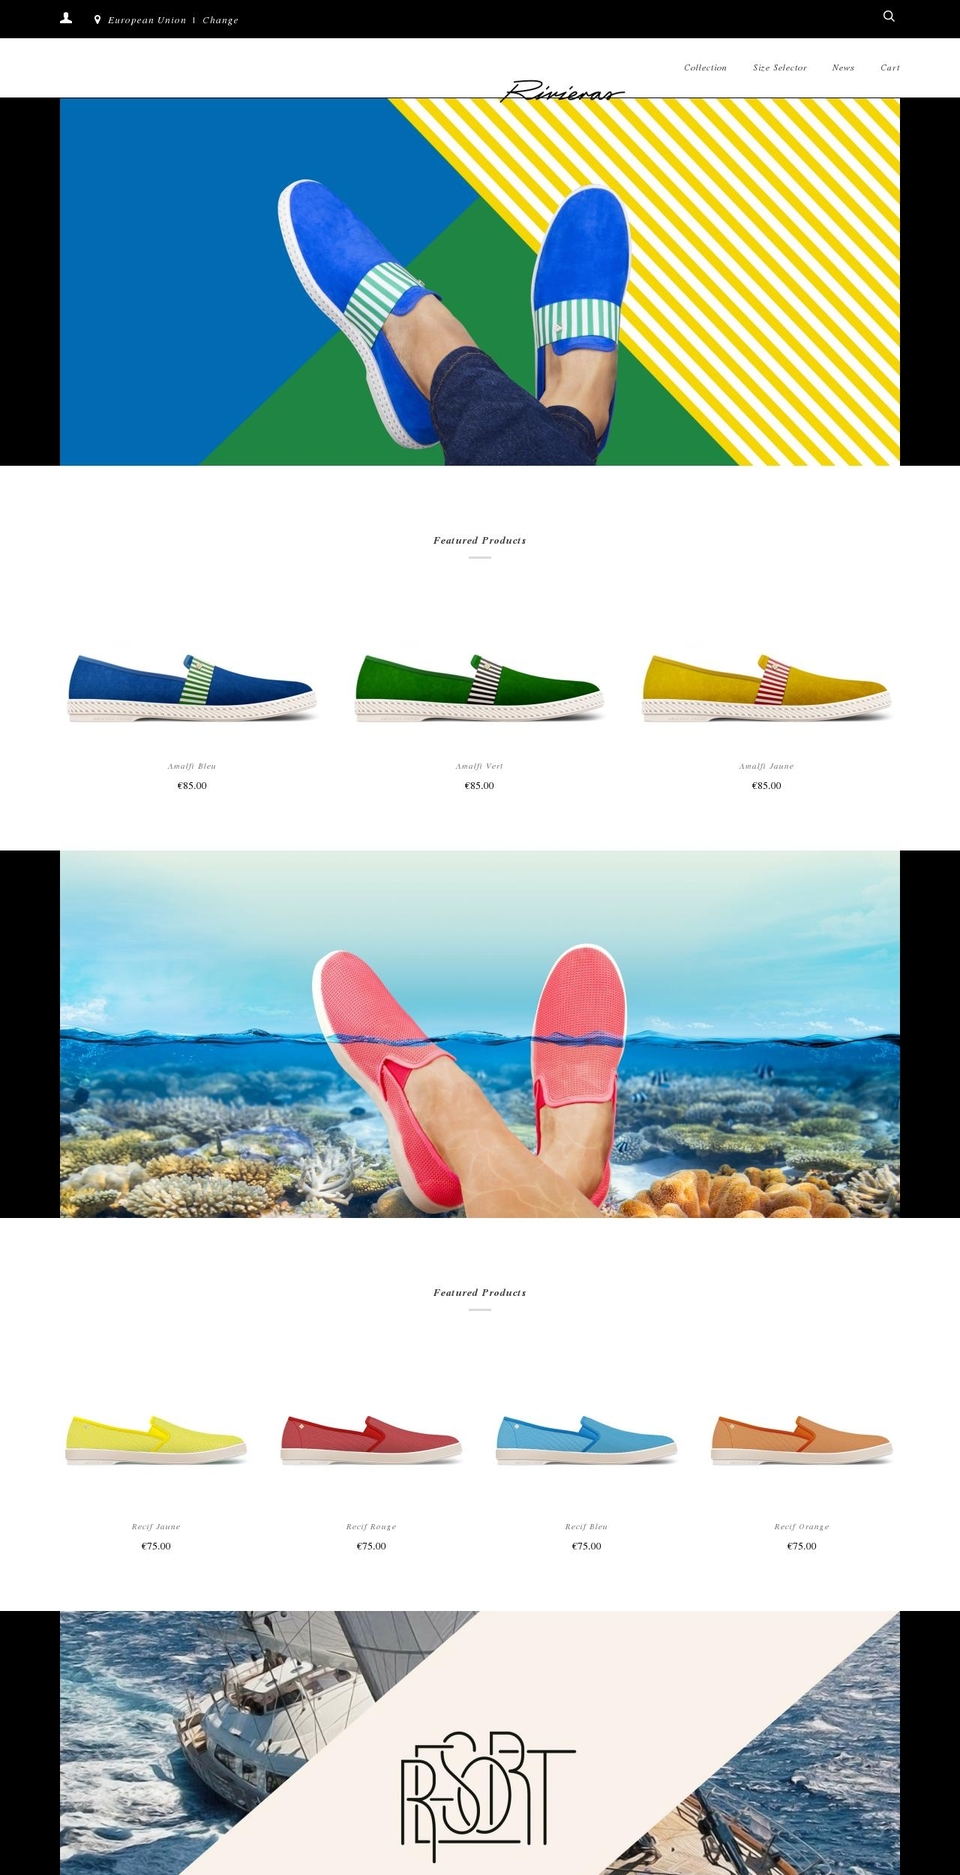 Rivieras [Plus]-TH-July-30-2018 Shopify theme site example rivieras-shoes.at